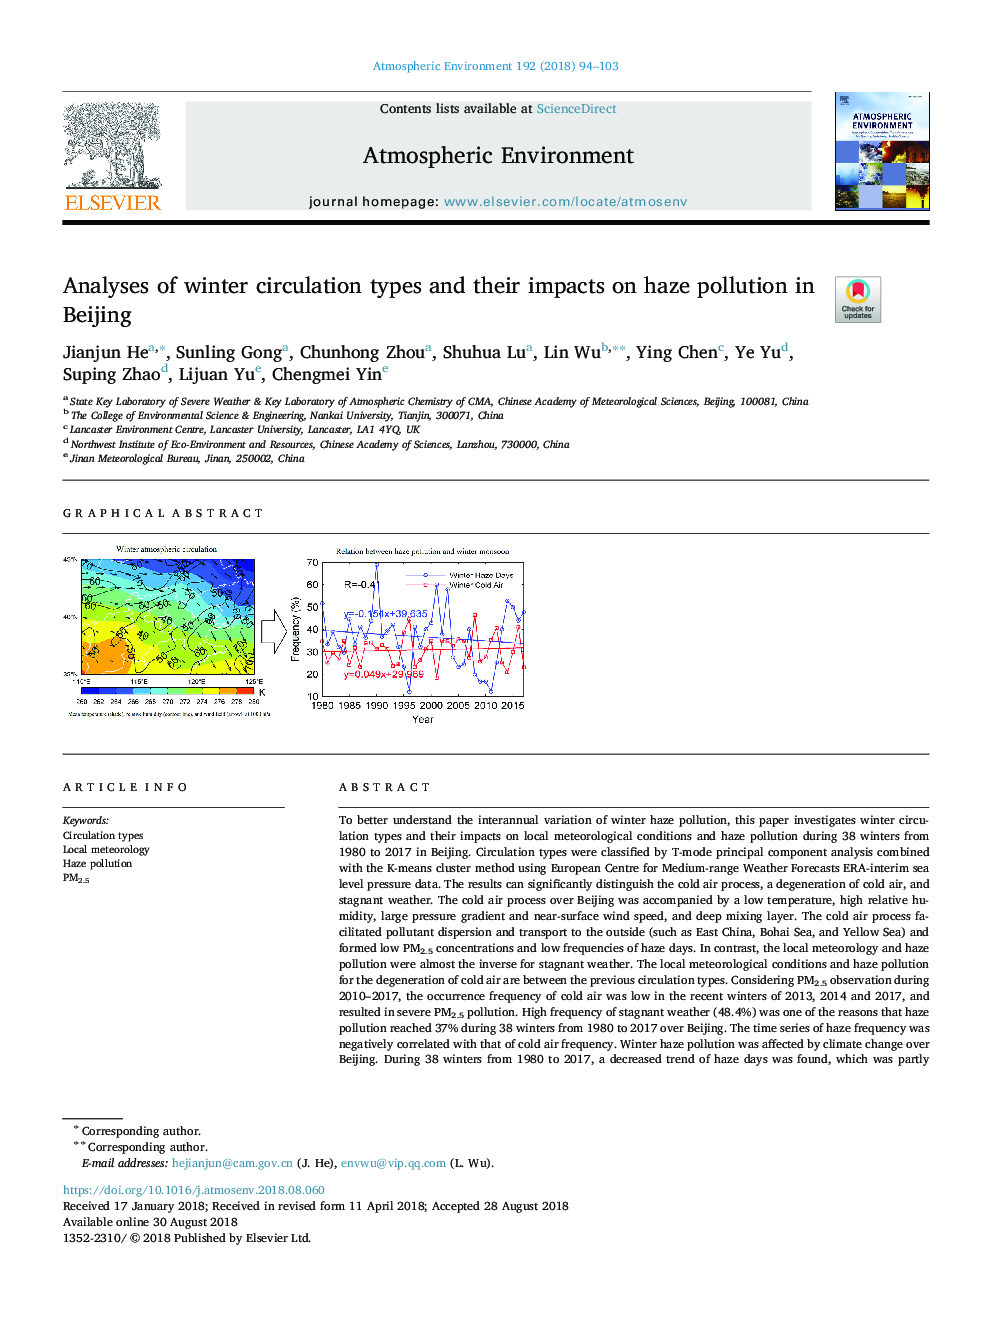 Analyses of winter circulation types and their impacts on haze pollution in Beijing